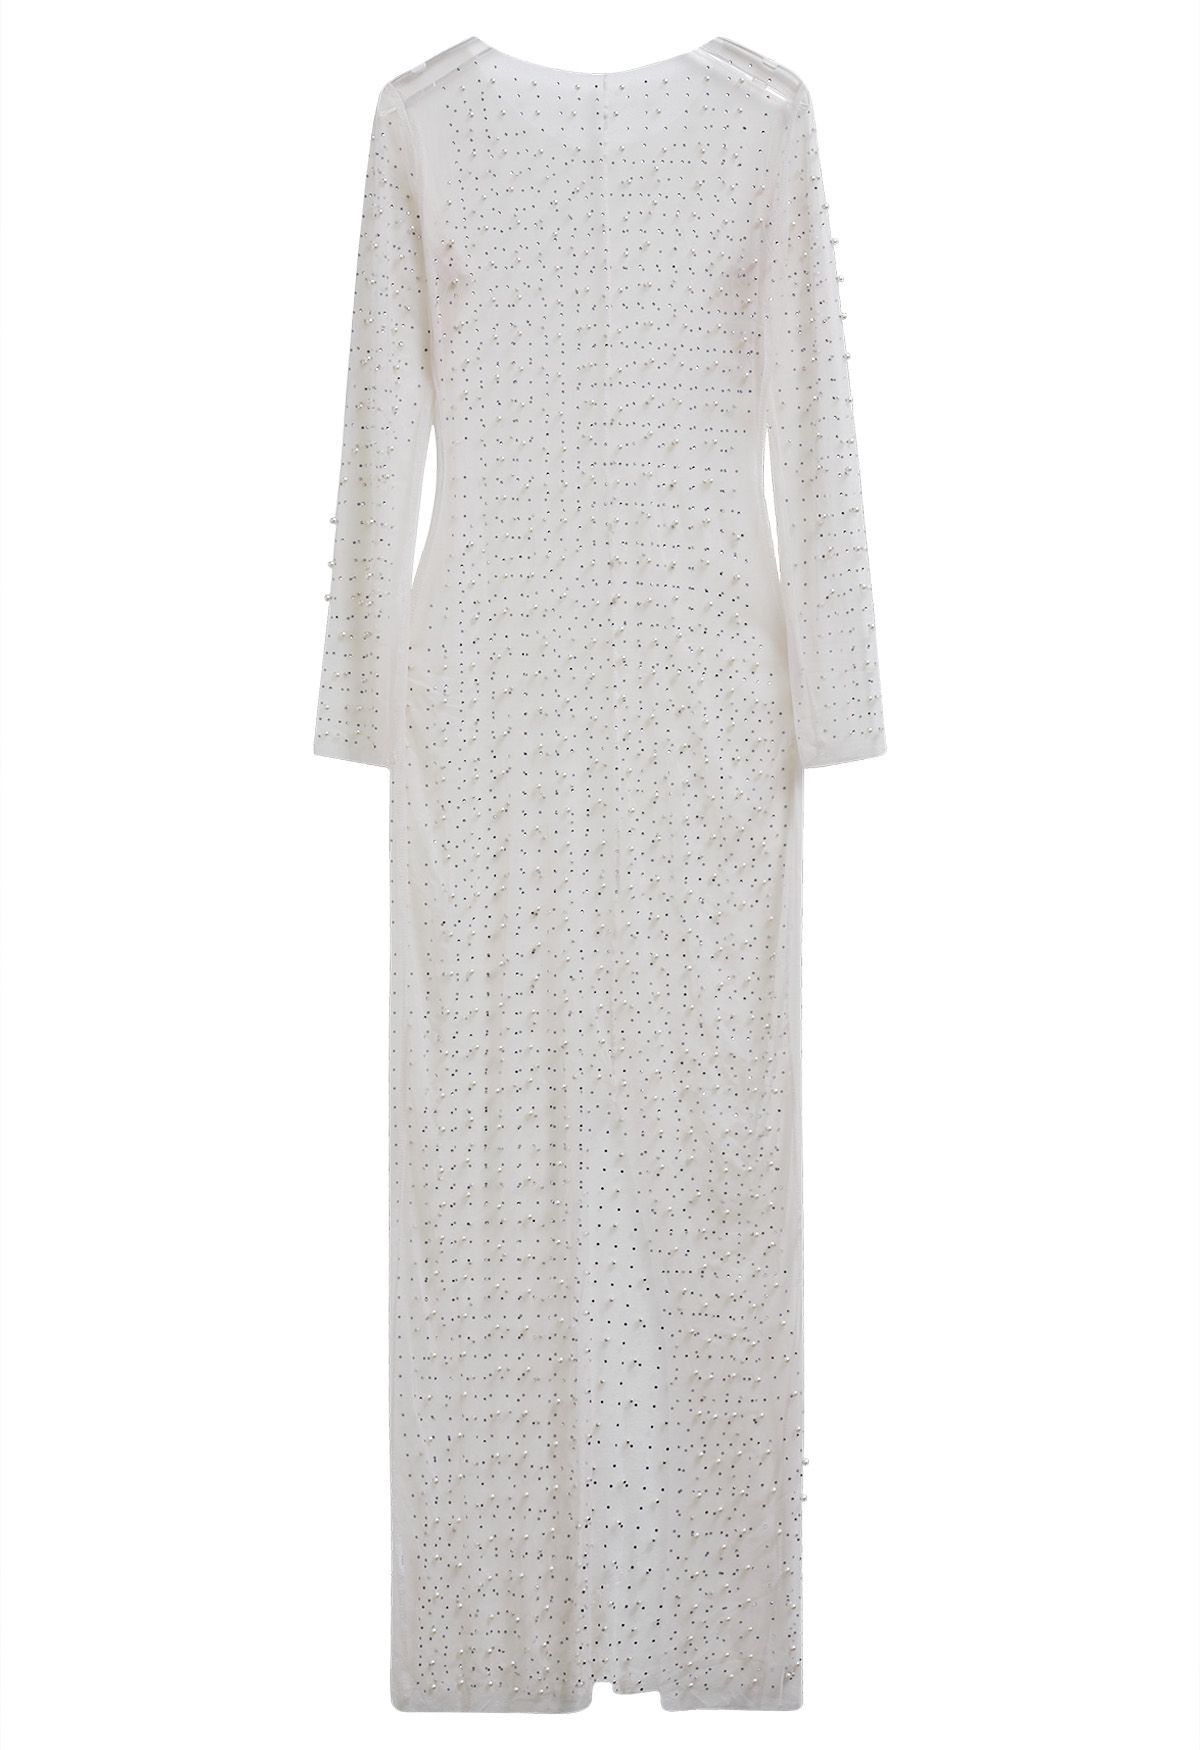 Full Pearl Embellished Sheer Mesh Cover-Up Maxi Dress in Cream